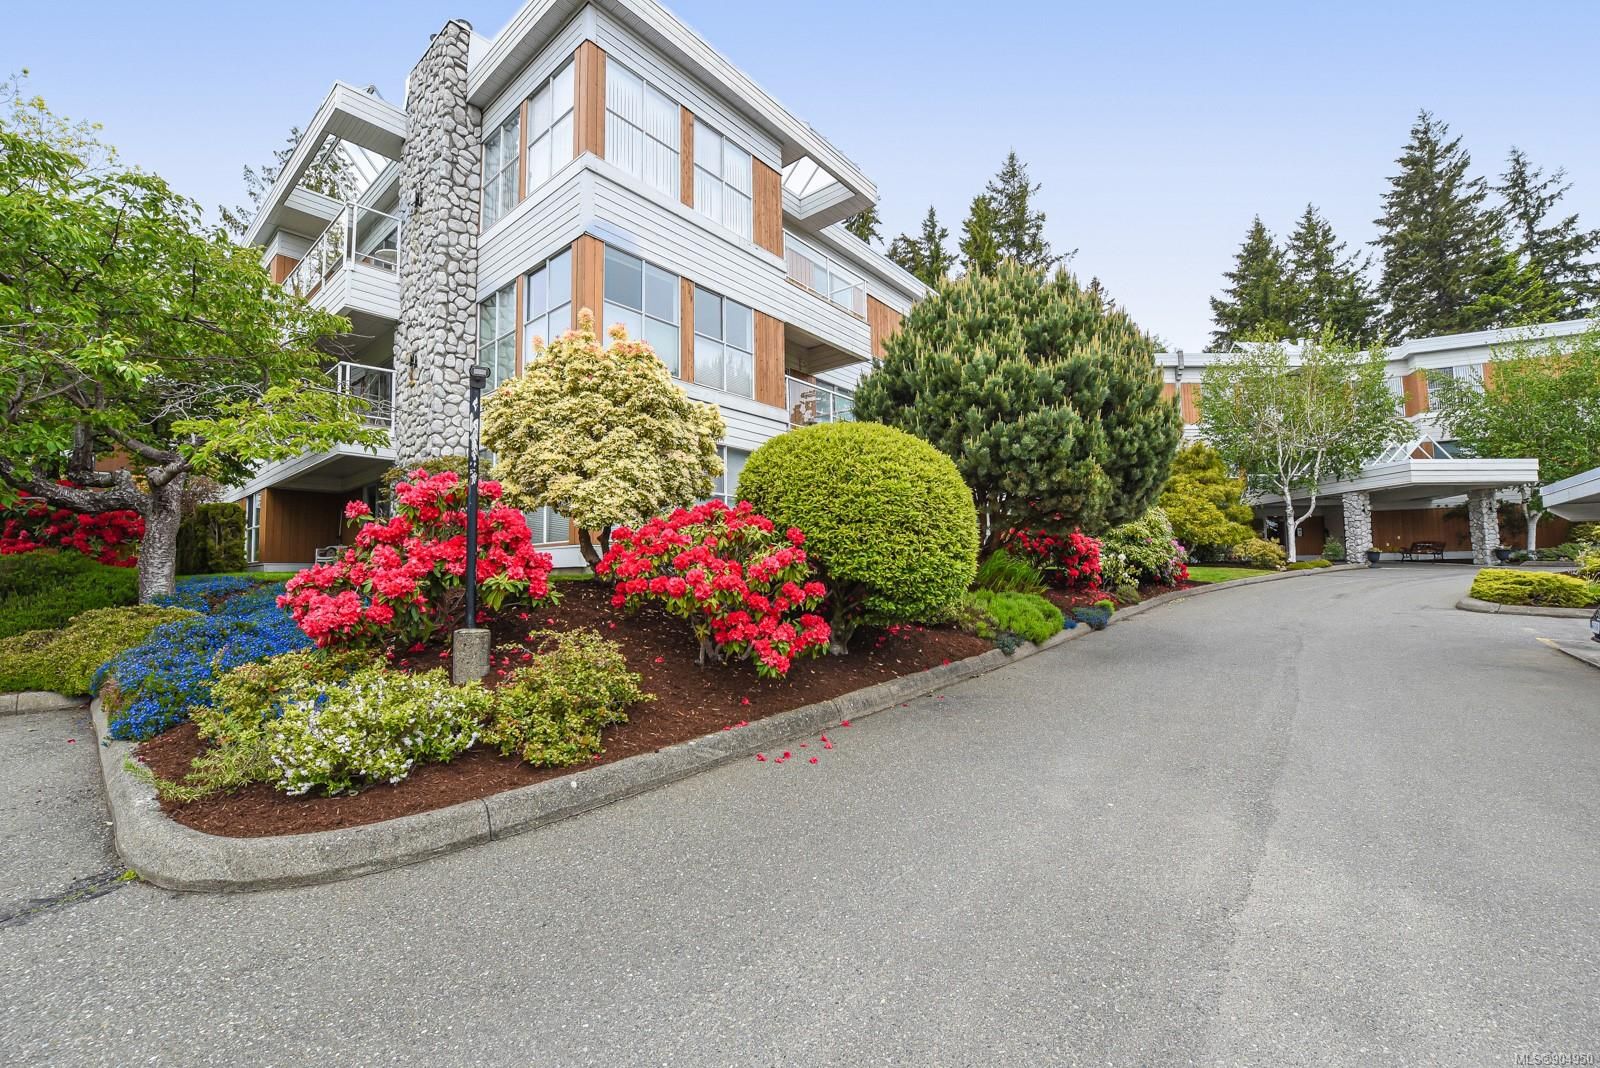 I have sold a property at 307 1686 Balmoral Ave in Comox
